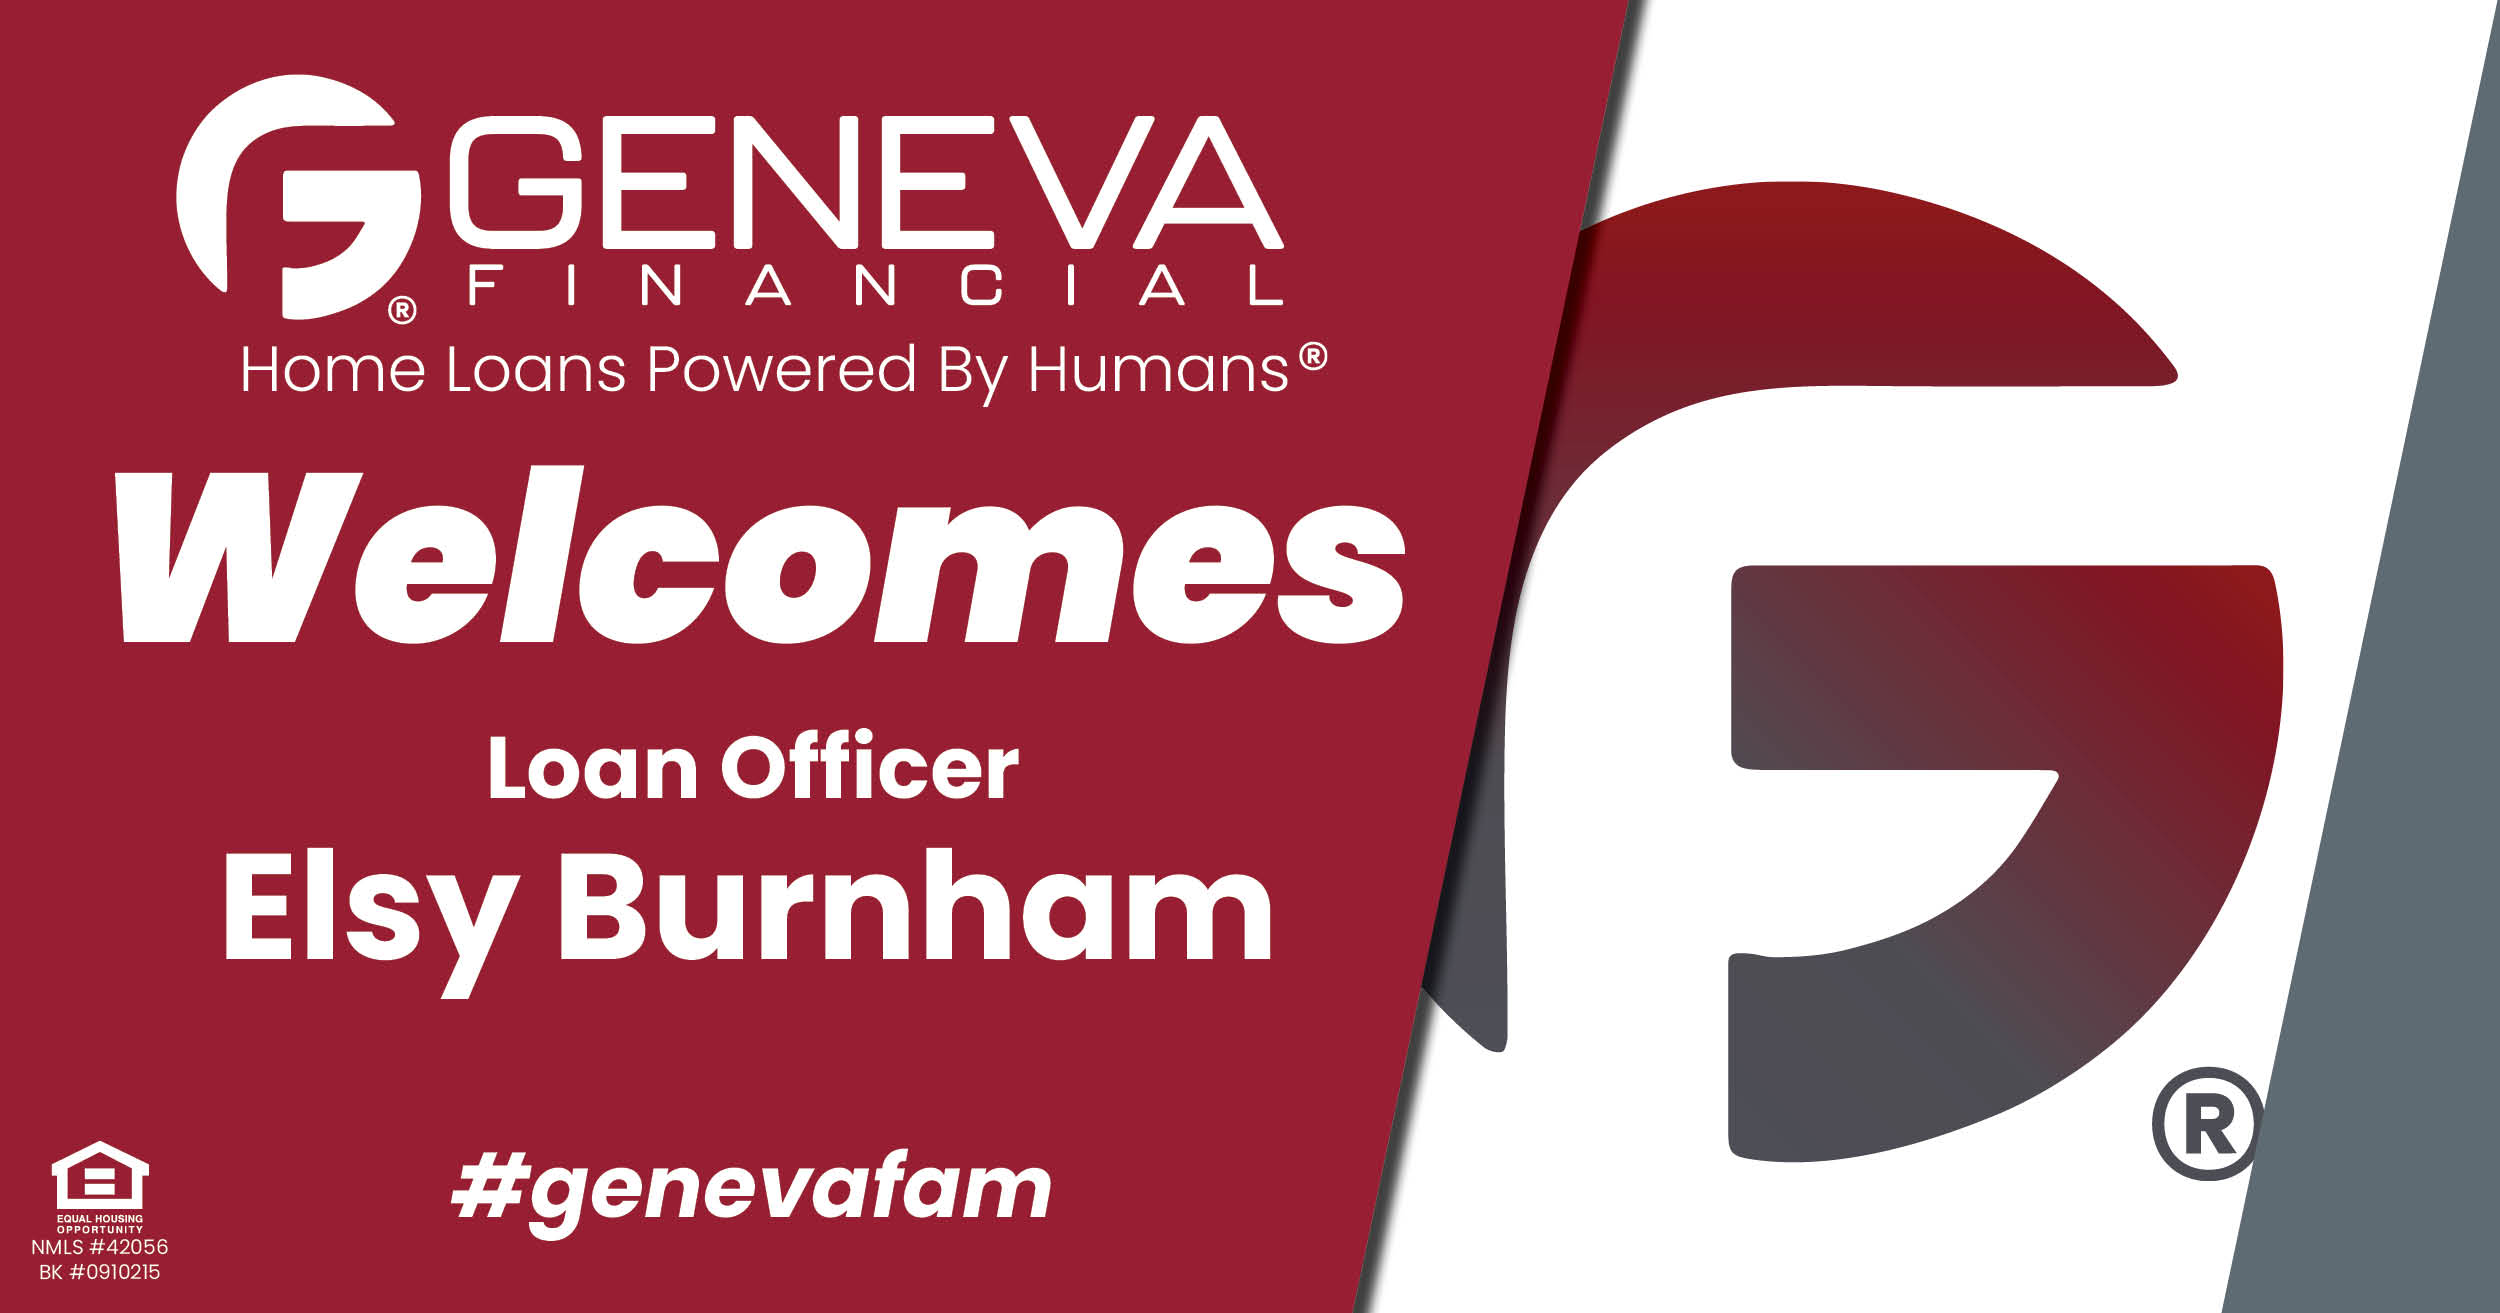 Geneva Financial Welcomes New Loan Officer Elsy Burnham to Miami, FL – Home Loans Powered by Humans®.